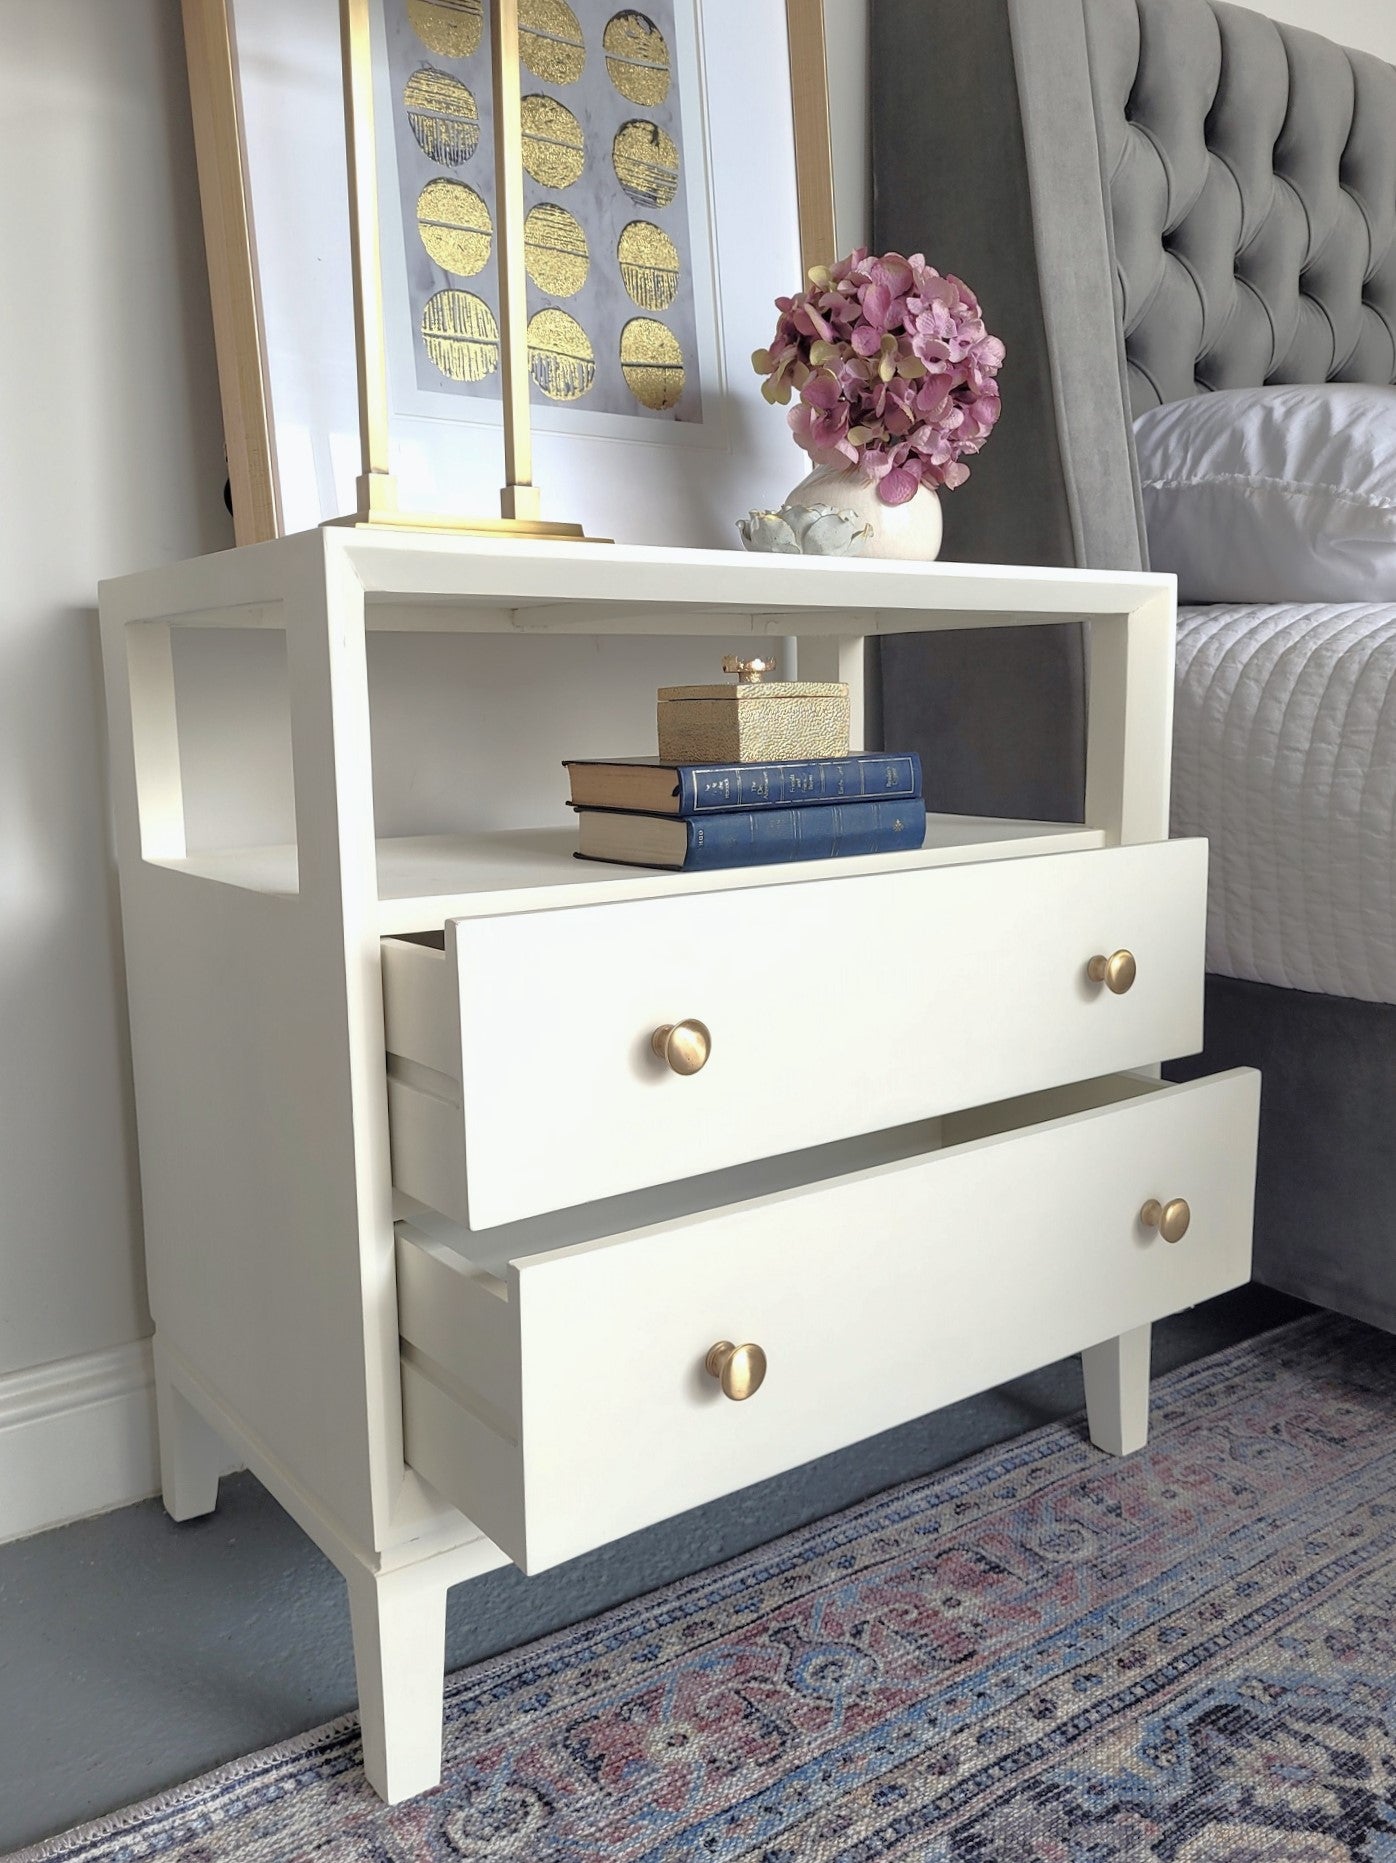 Kendall Large Bedside Table Ivory